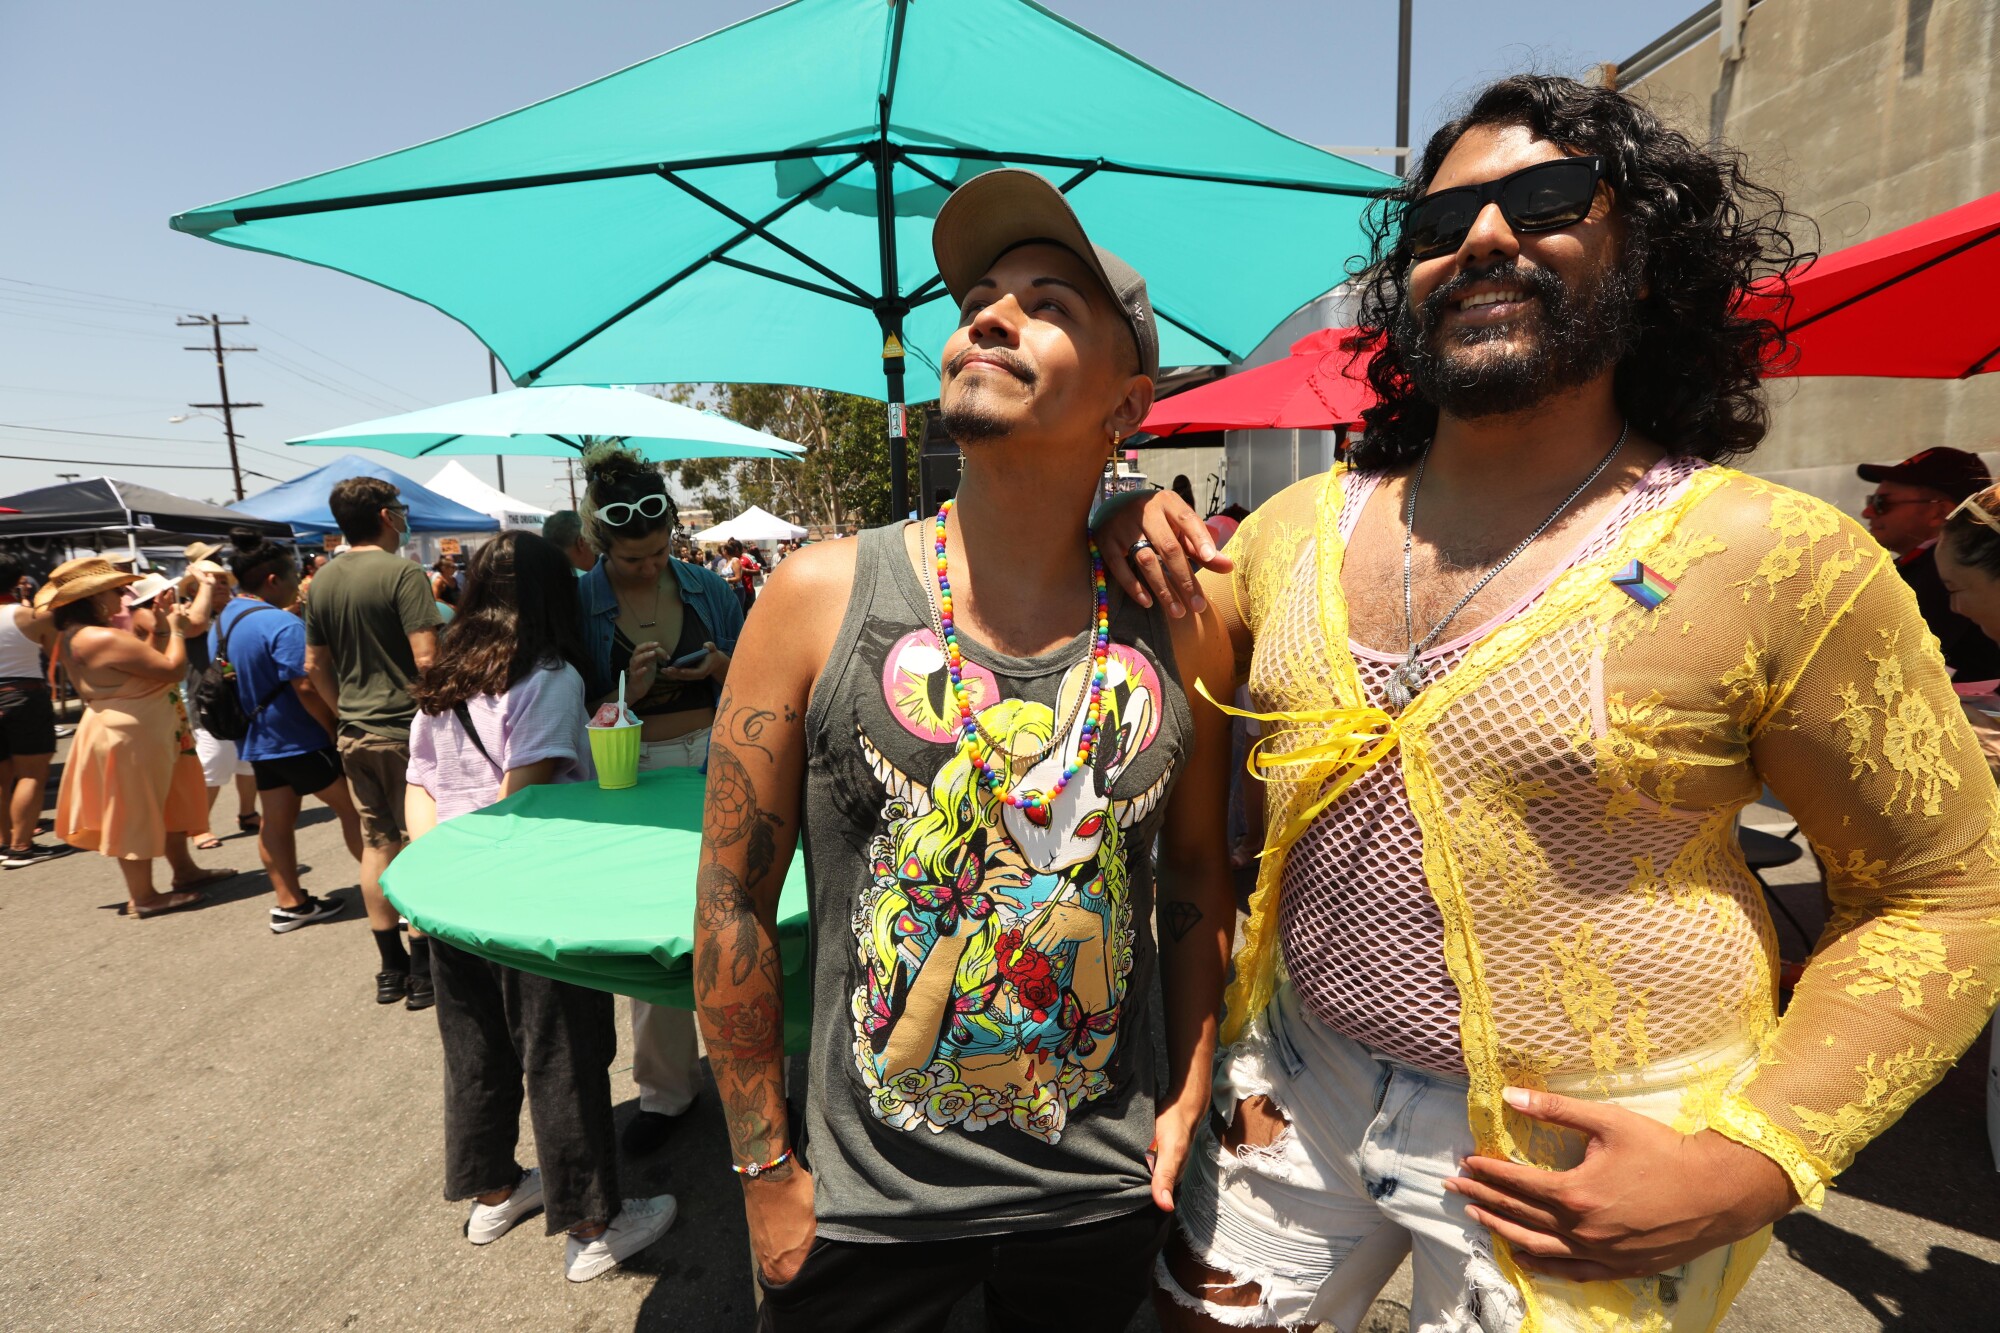 Justin Carrillo, left, and his brother William Urbina, enjoy a day at the Queer Mercado.